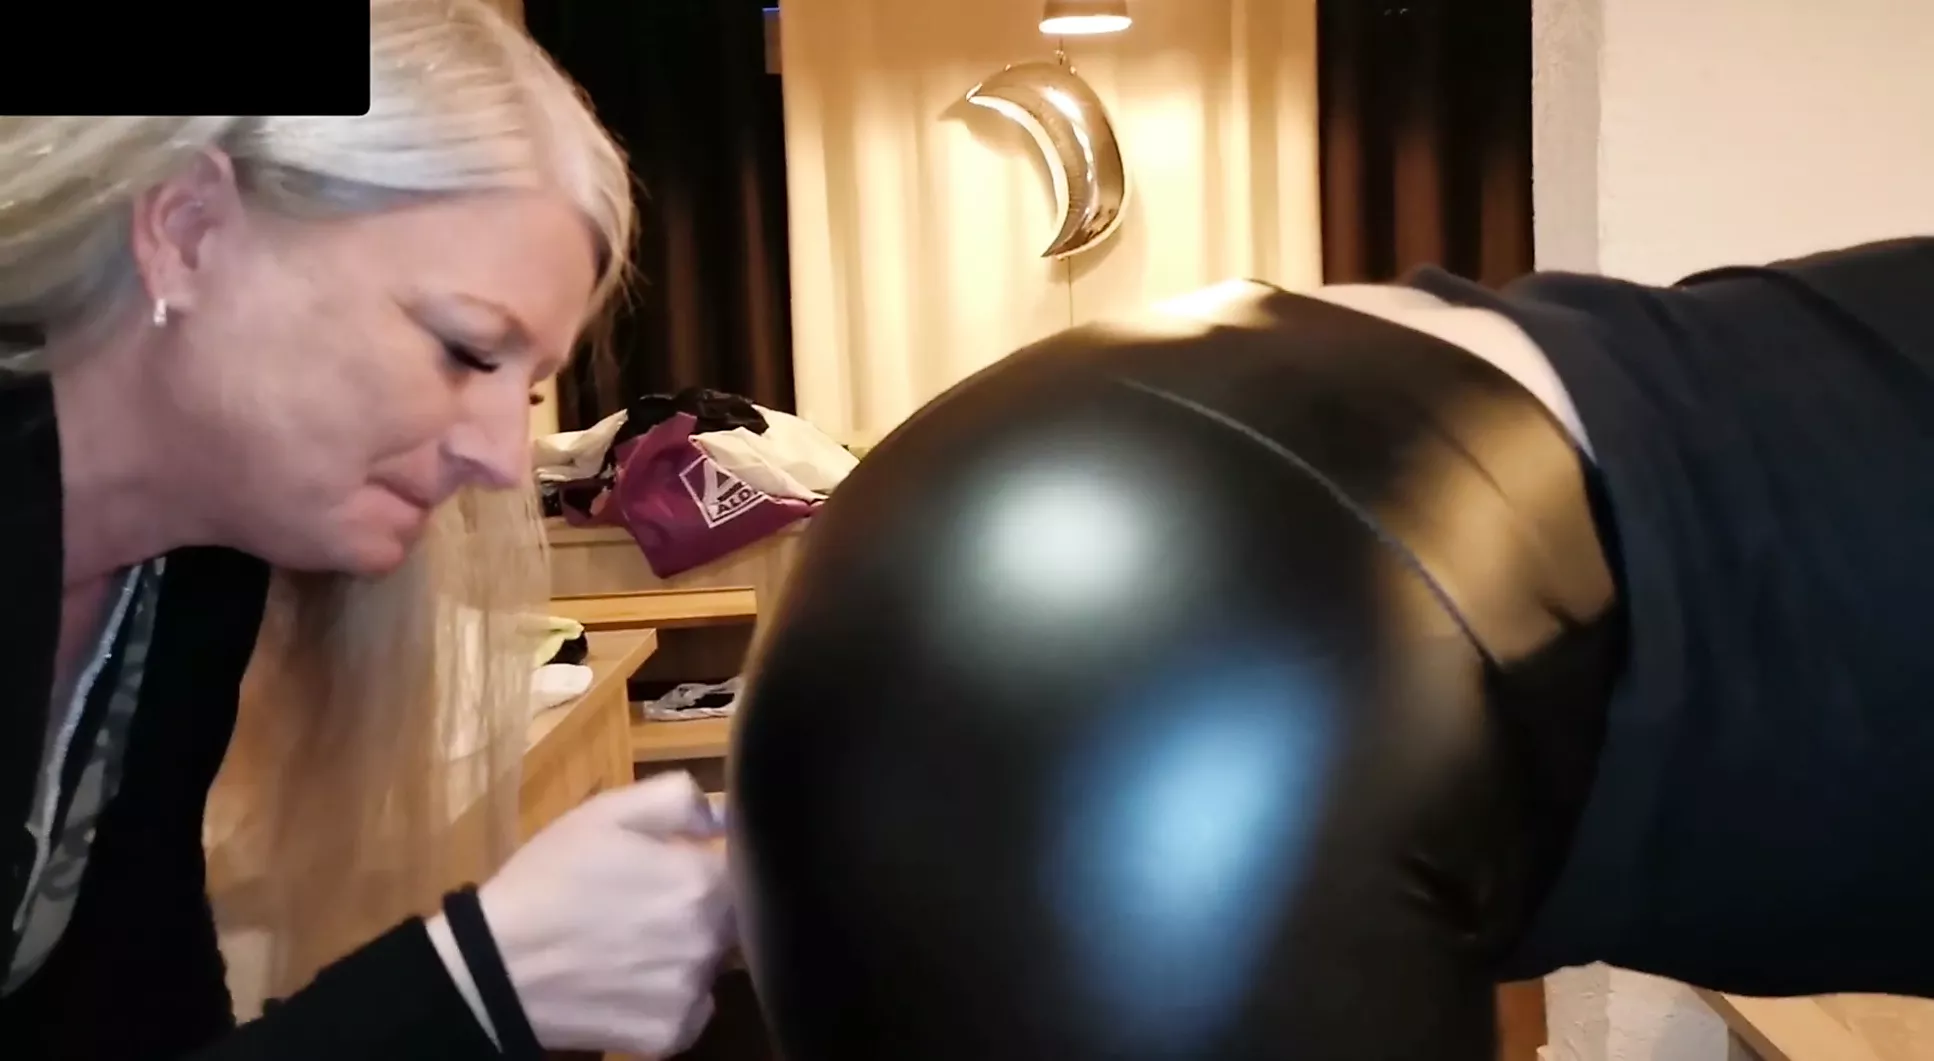 Slut in leather leggings gets cum on ass and milf licks clean image